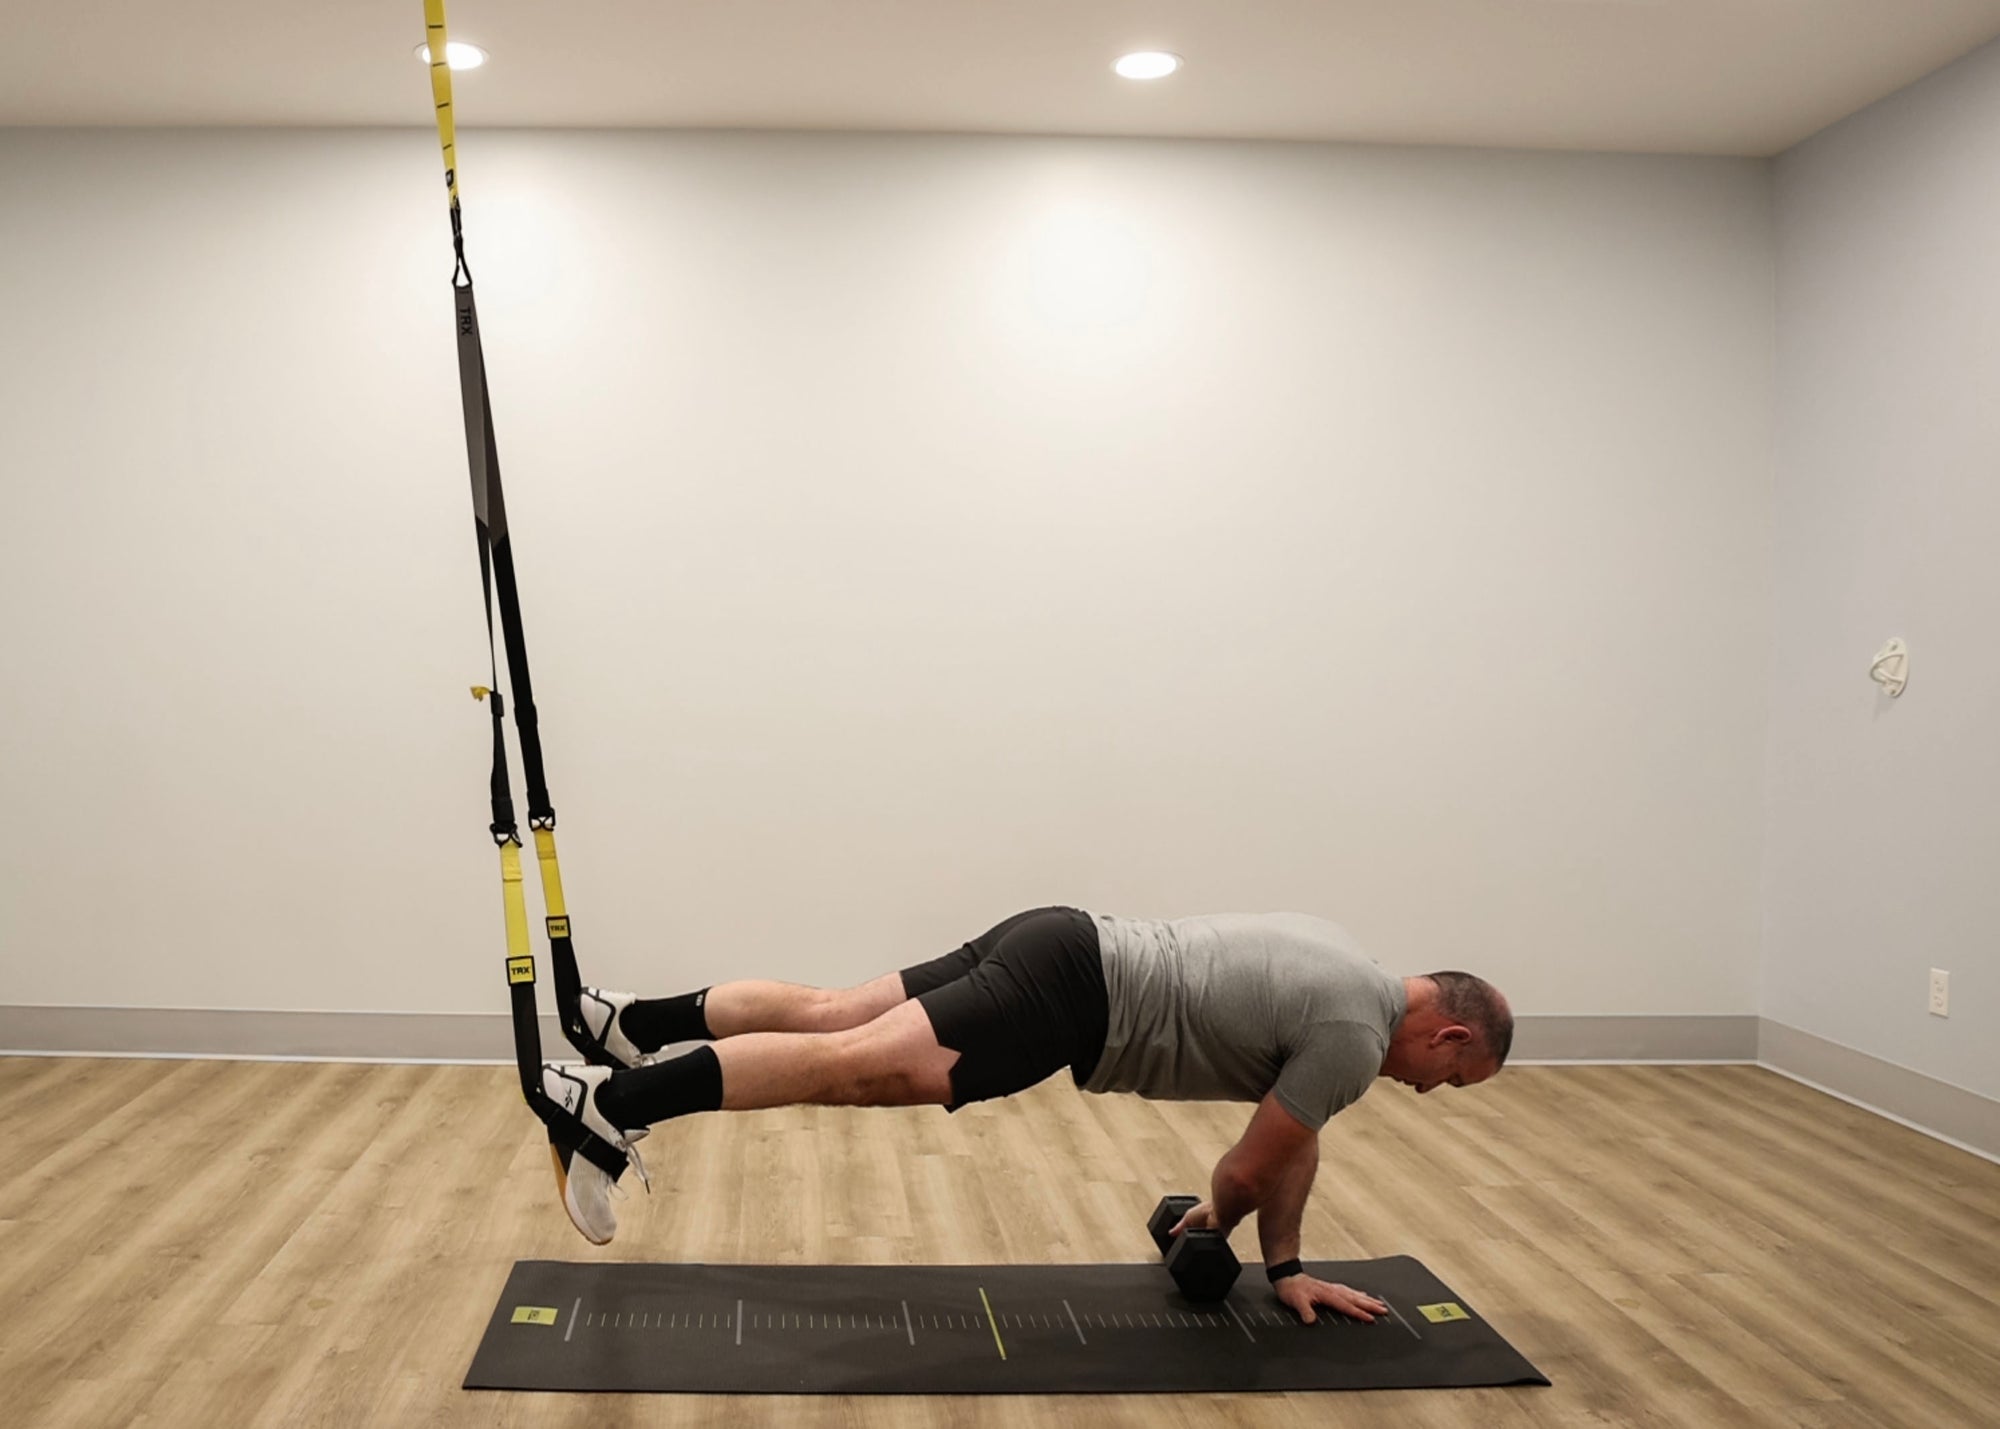 Try Our 3 Favorite Weight Exercises With The TRX Suspension Trainer